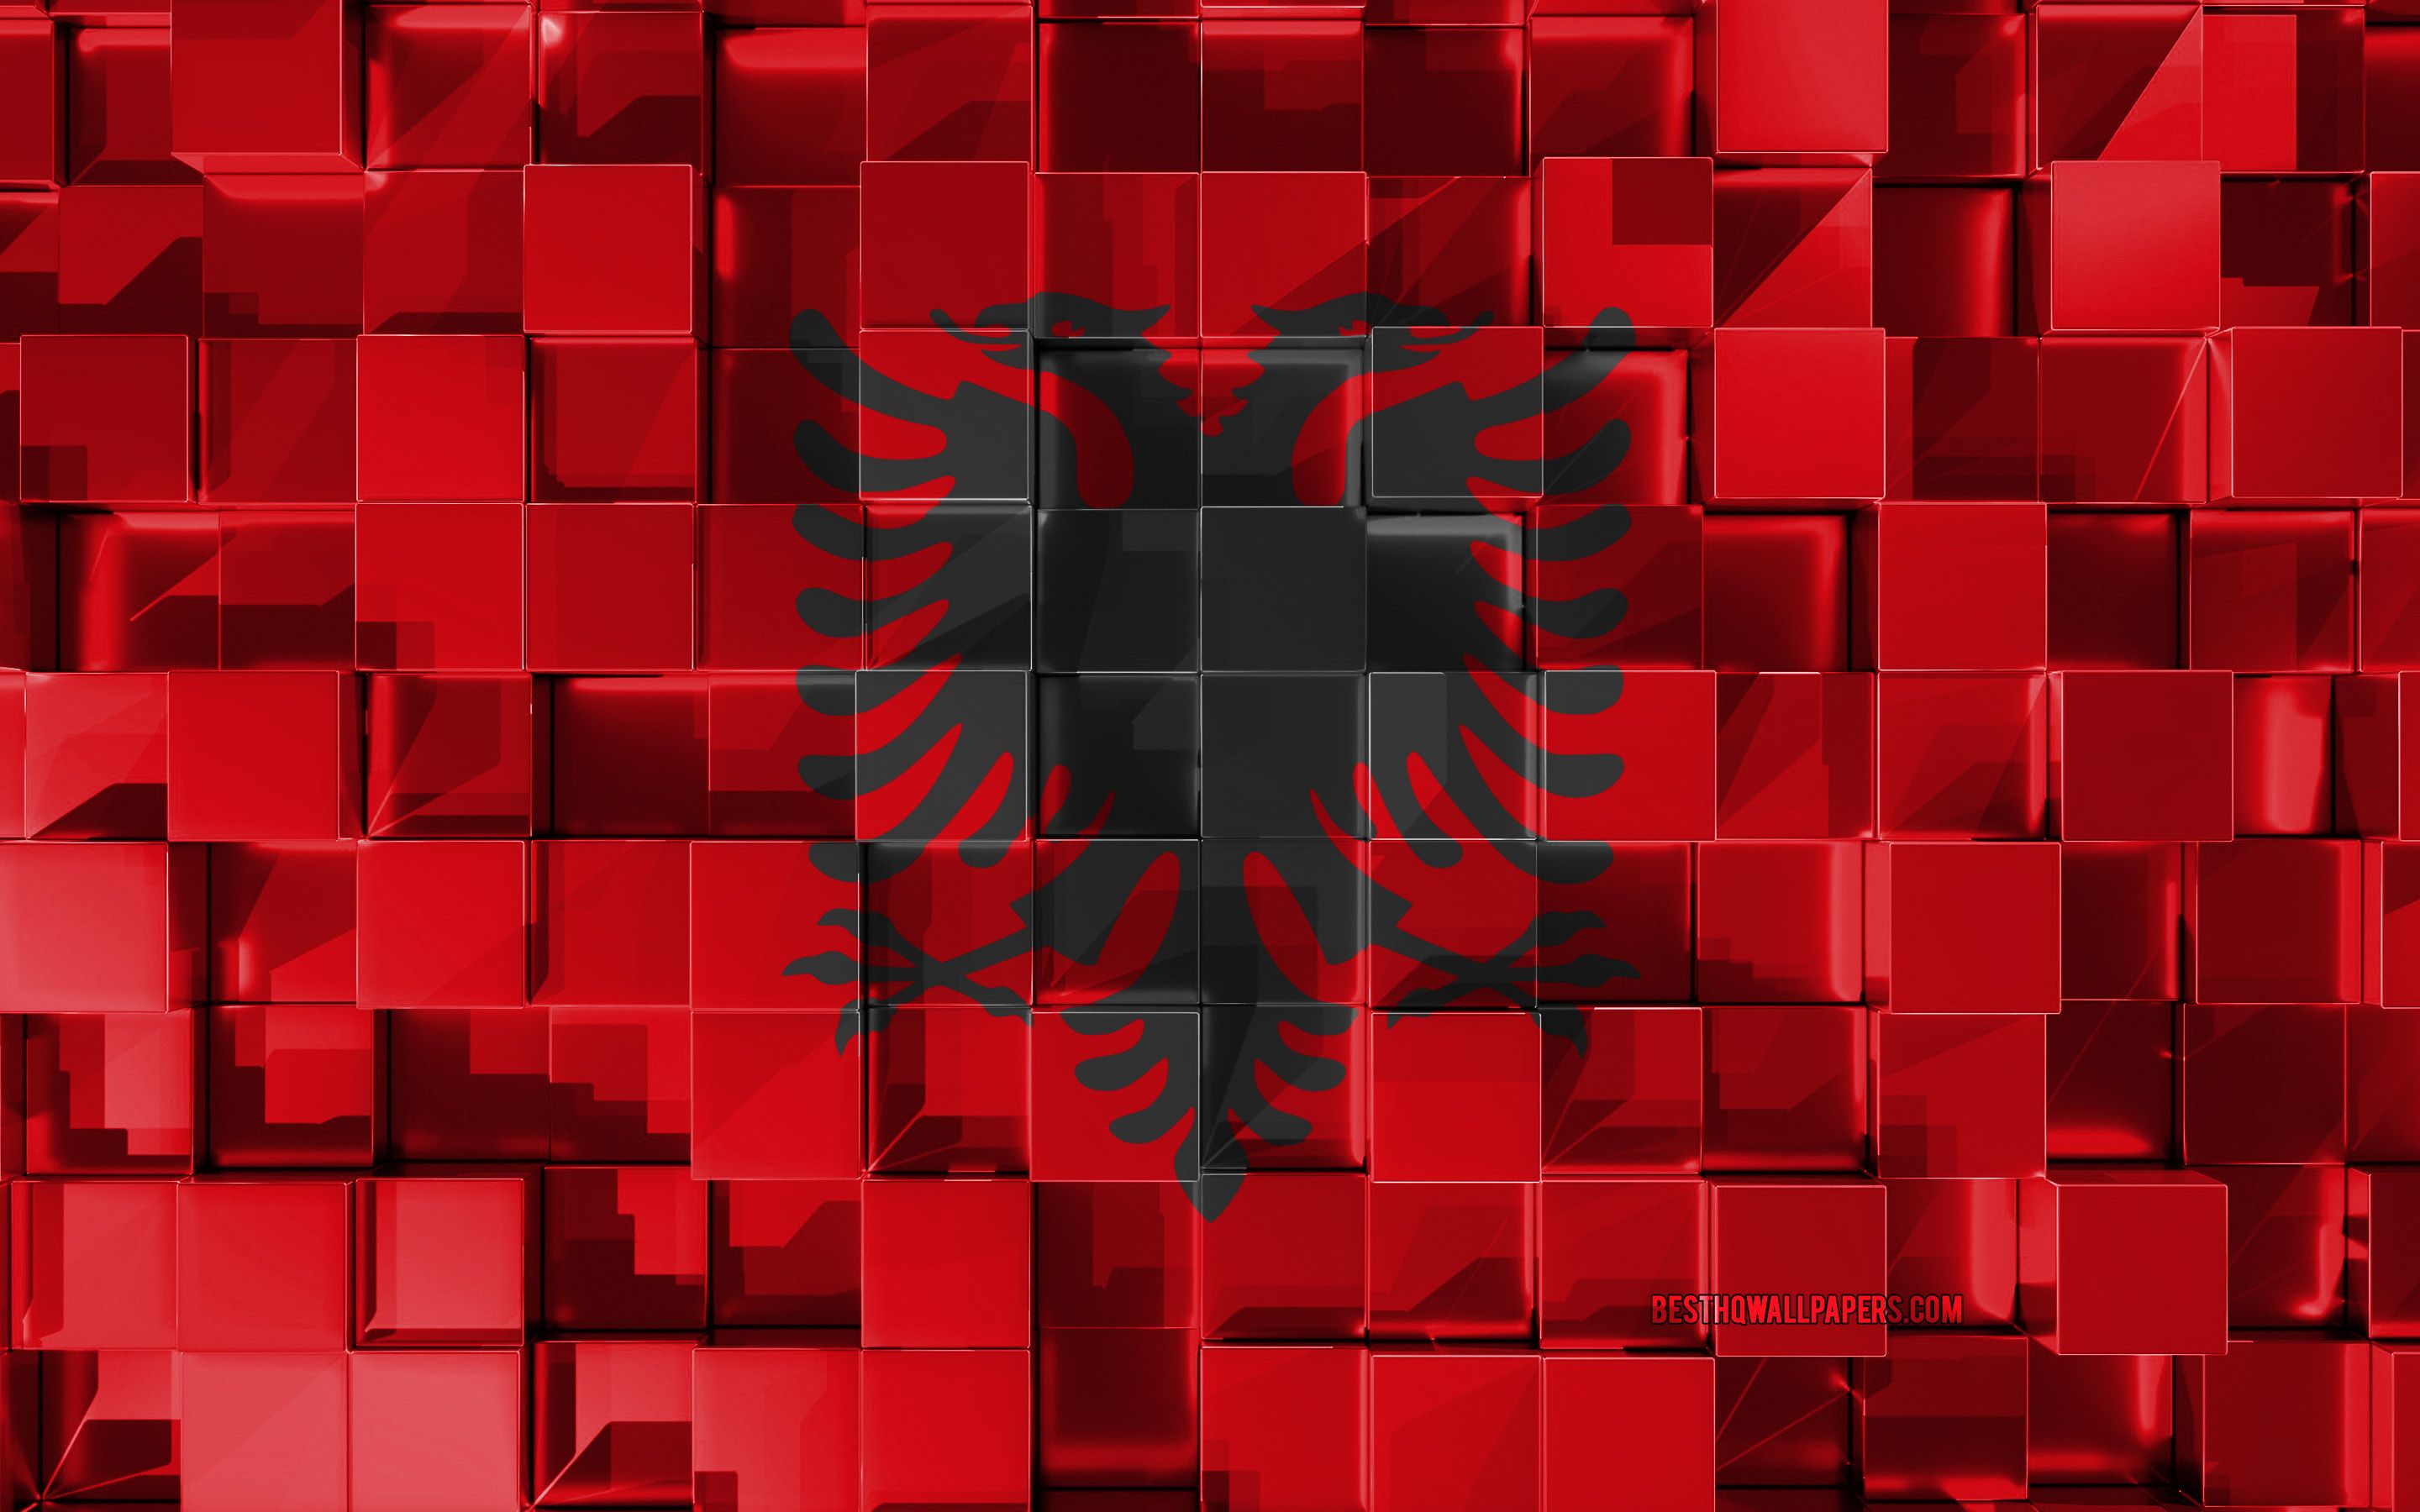 Download wallpaper Flag of Albania, 4k, 3D flag, 3D cubes texture, Albania flag, 3D art, Albania, Europe, 3D texture for desktop with resolution 2880x1800. High Quality HD picture wallpaper